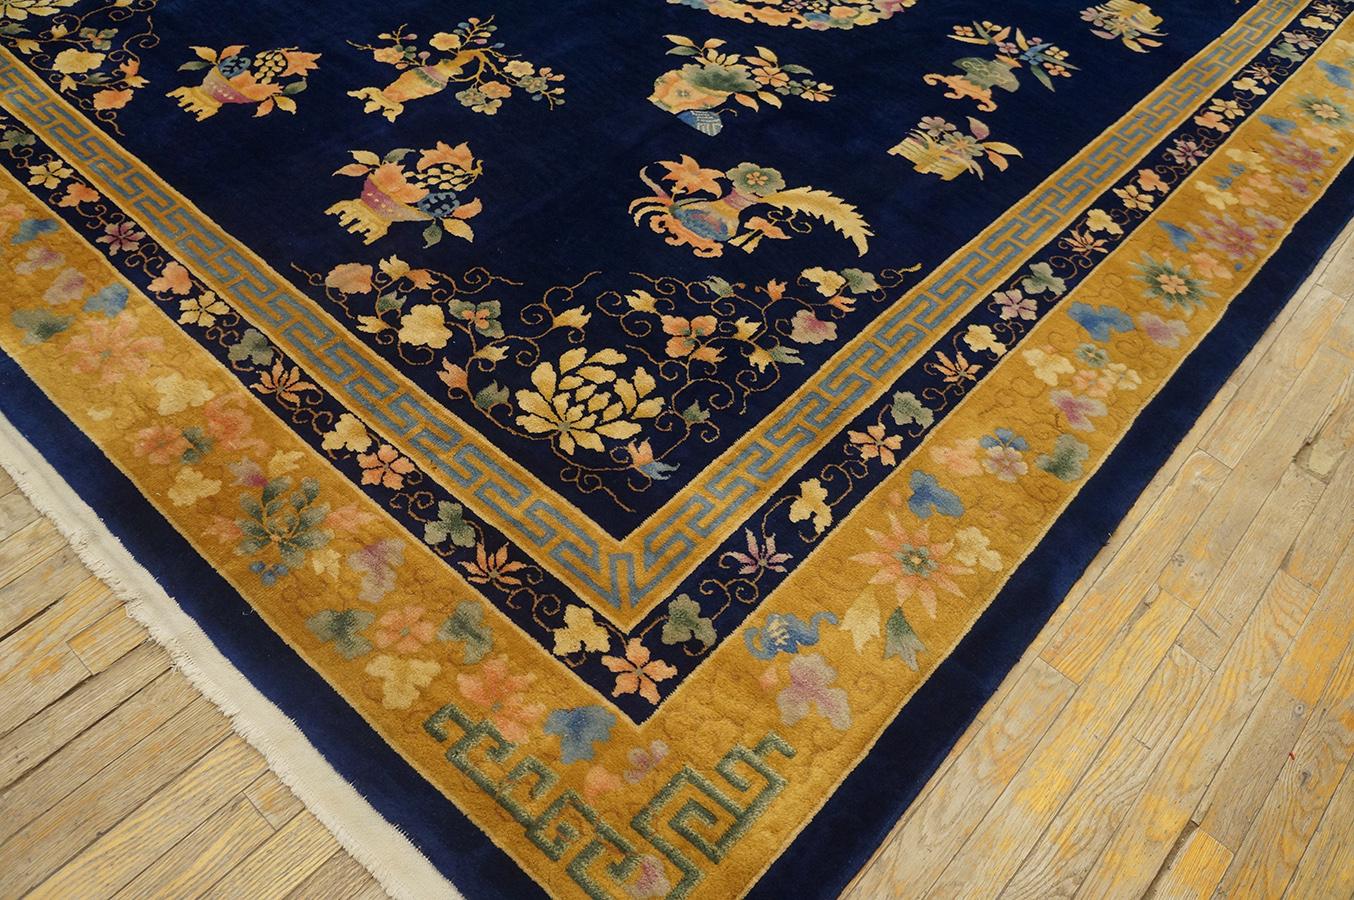 Early 20th Century 1920s Chinese Art Deco Carpet ( 8' 9'' x 11' 6'' - 266 x 350 cm ) For Sale